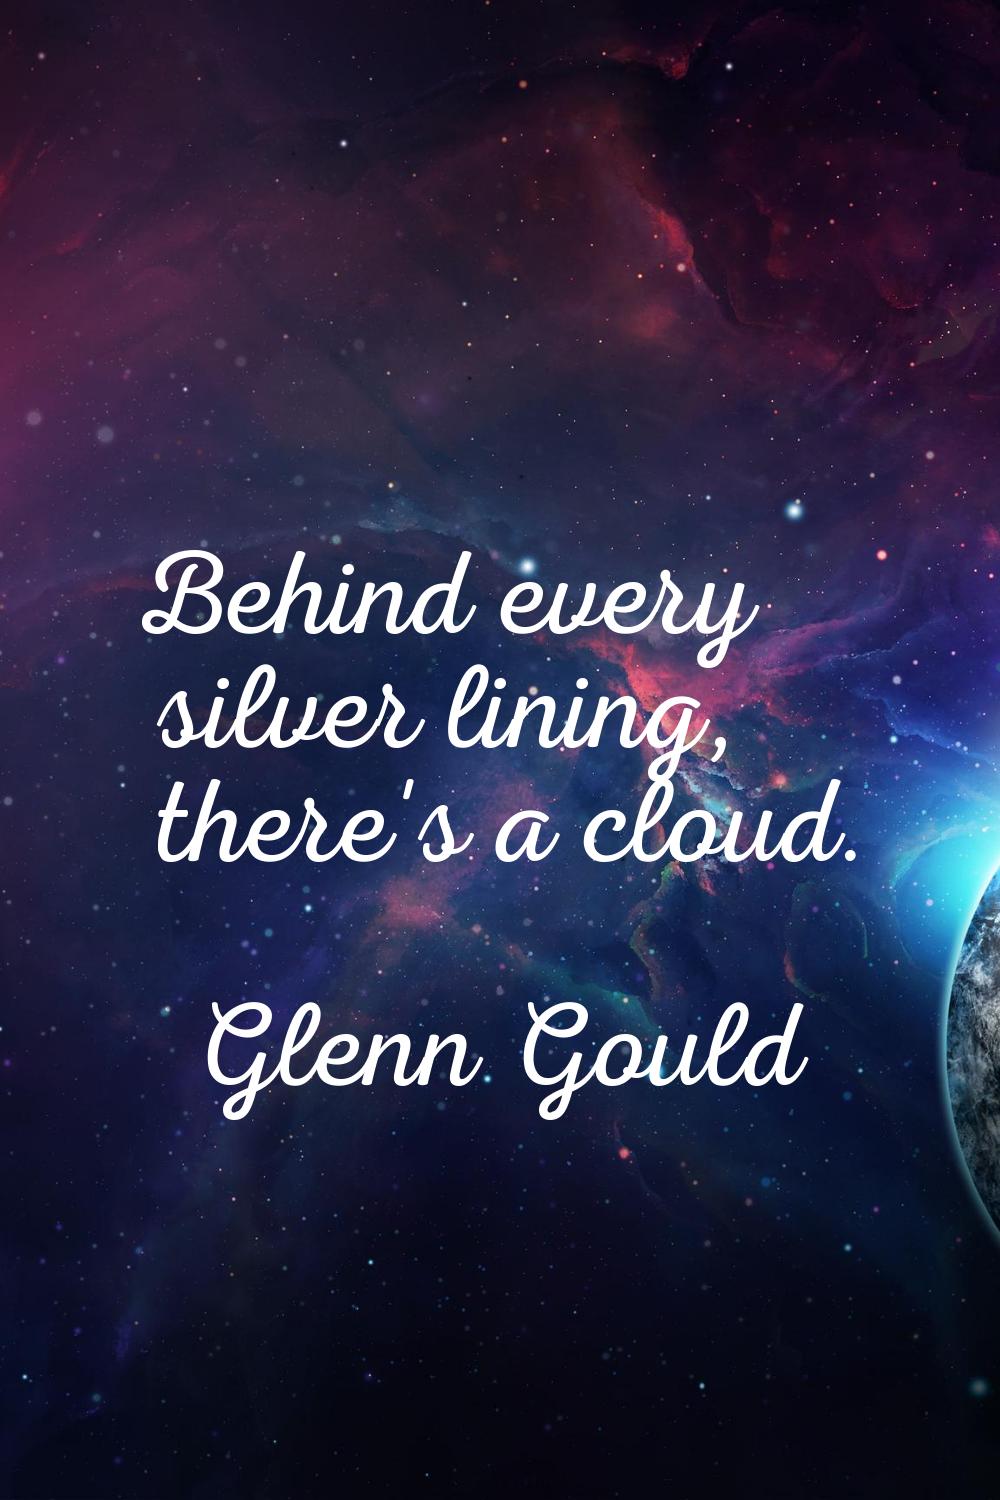 Behind every silver lining, there's a cloud.